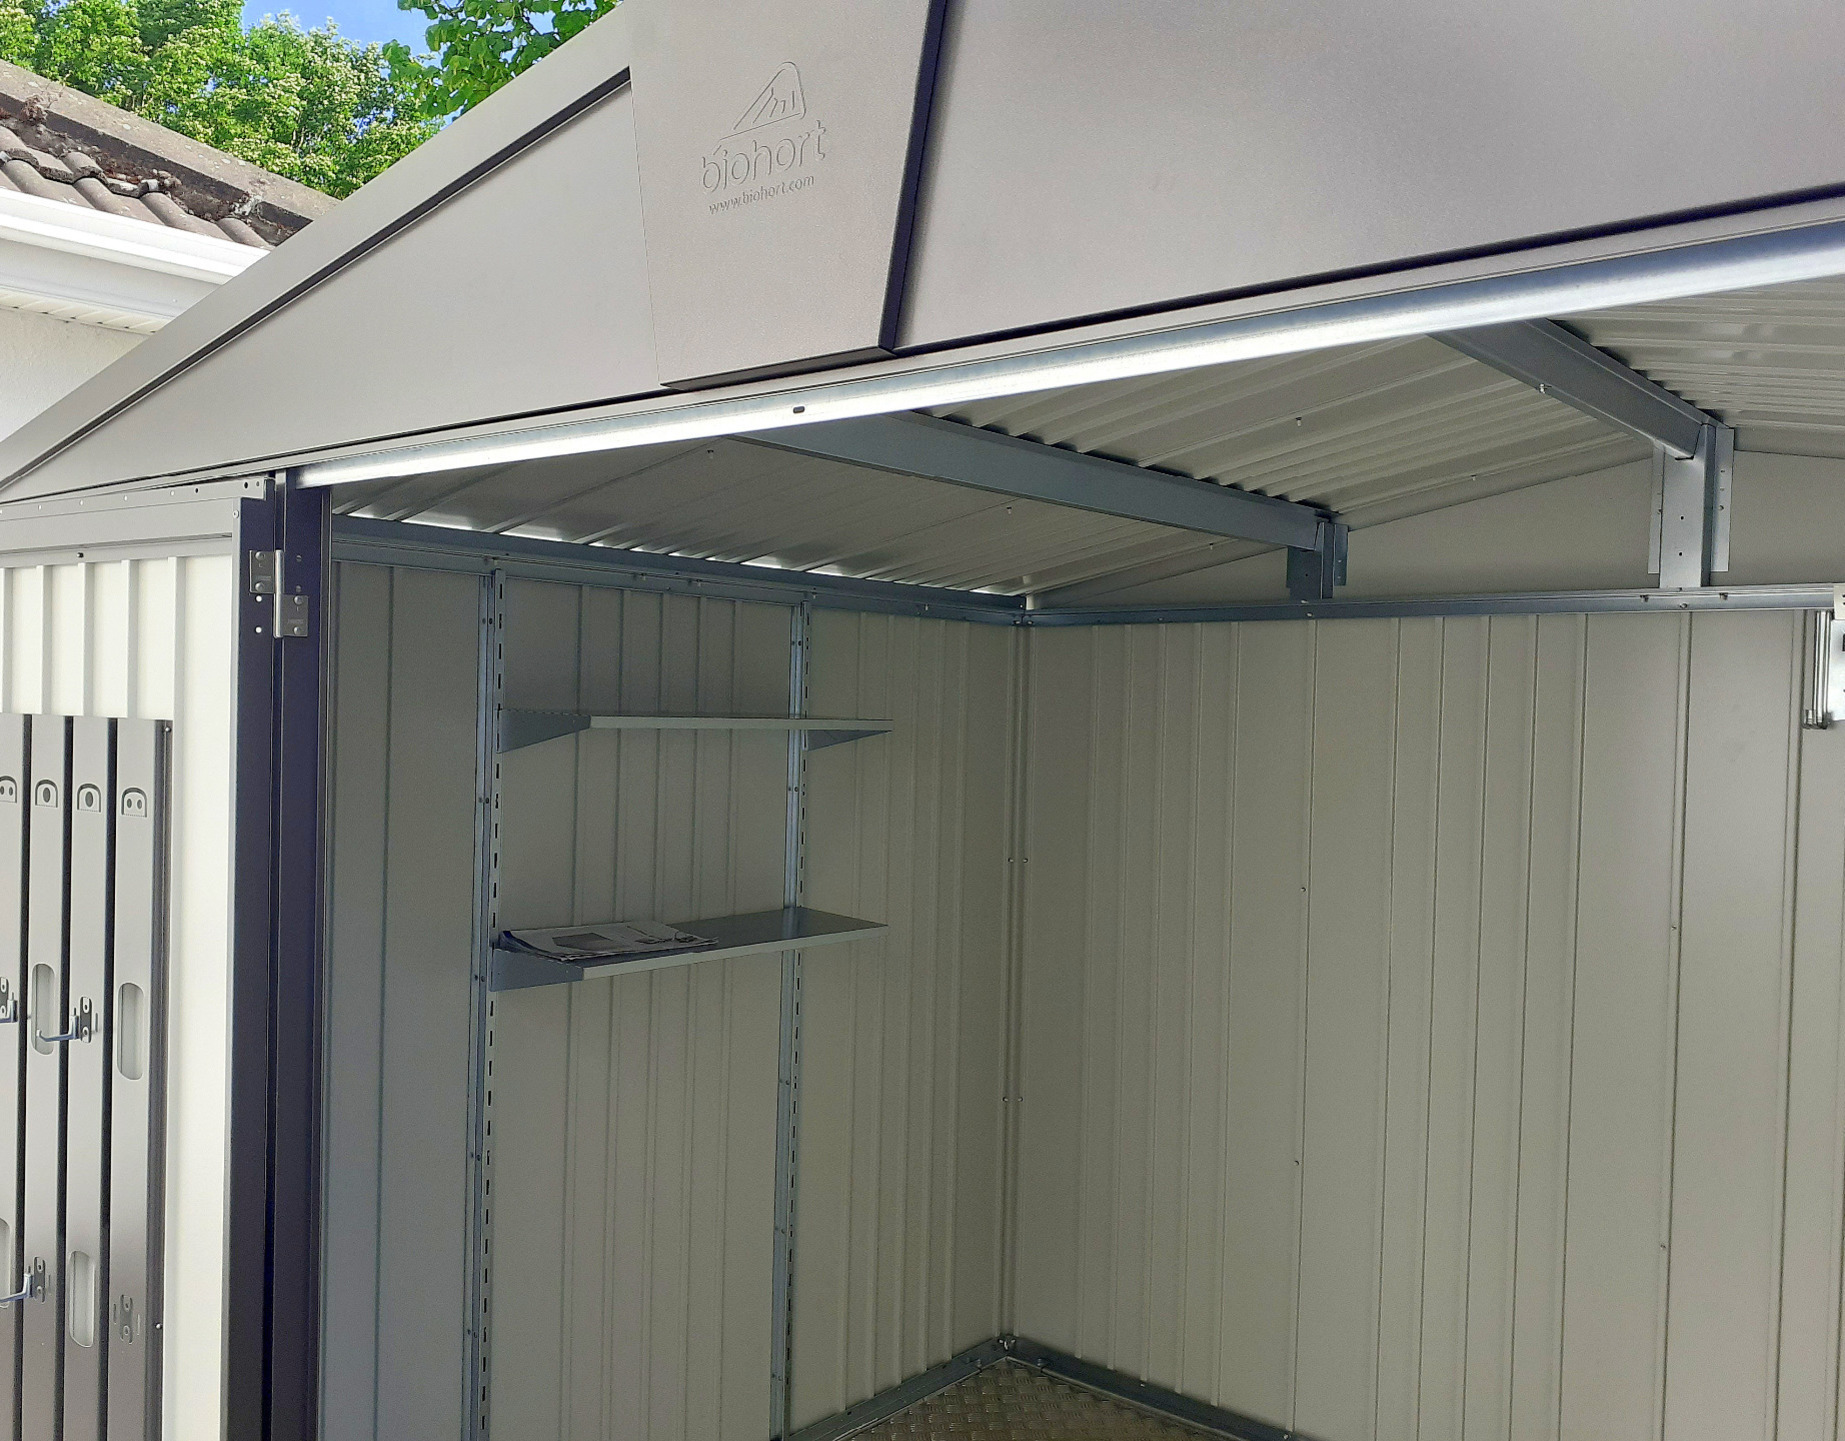 The Biohort Europa Size 5 Garden Shed in metallic dark grey | Popular Seller offering proven Quality at an Affordable Price | FREE Installations in Dublin | Owen Chubb, Tel 087-2306128